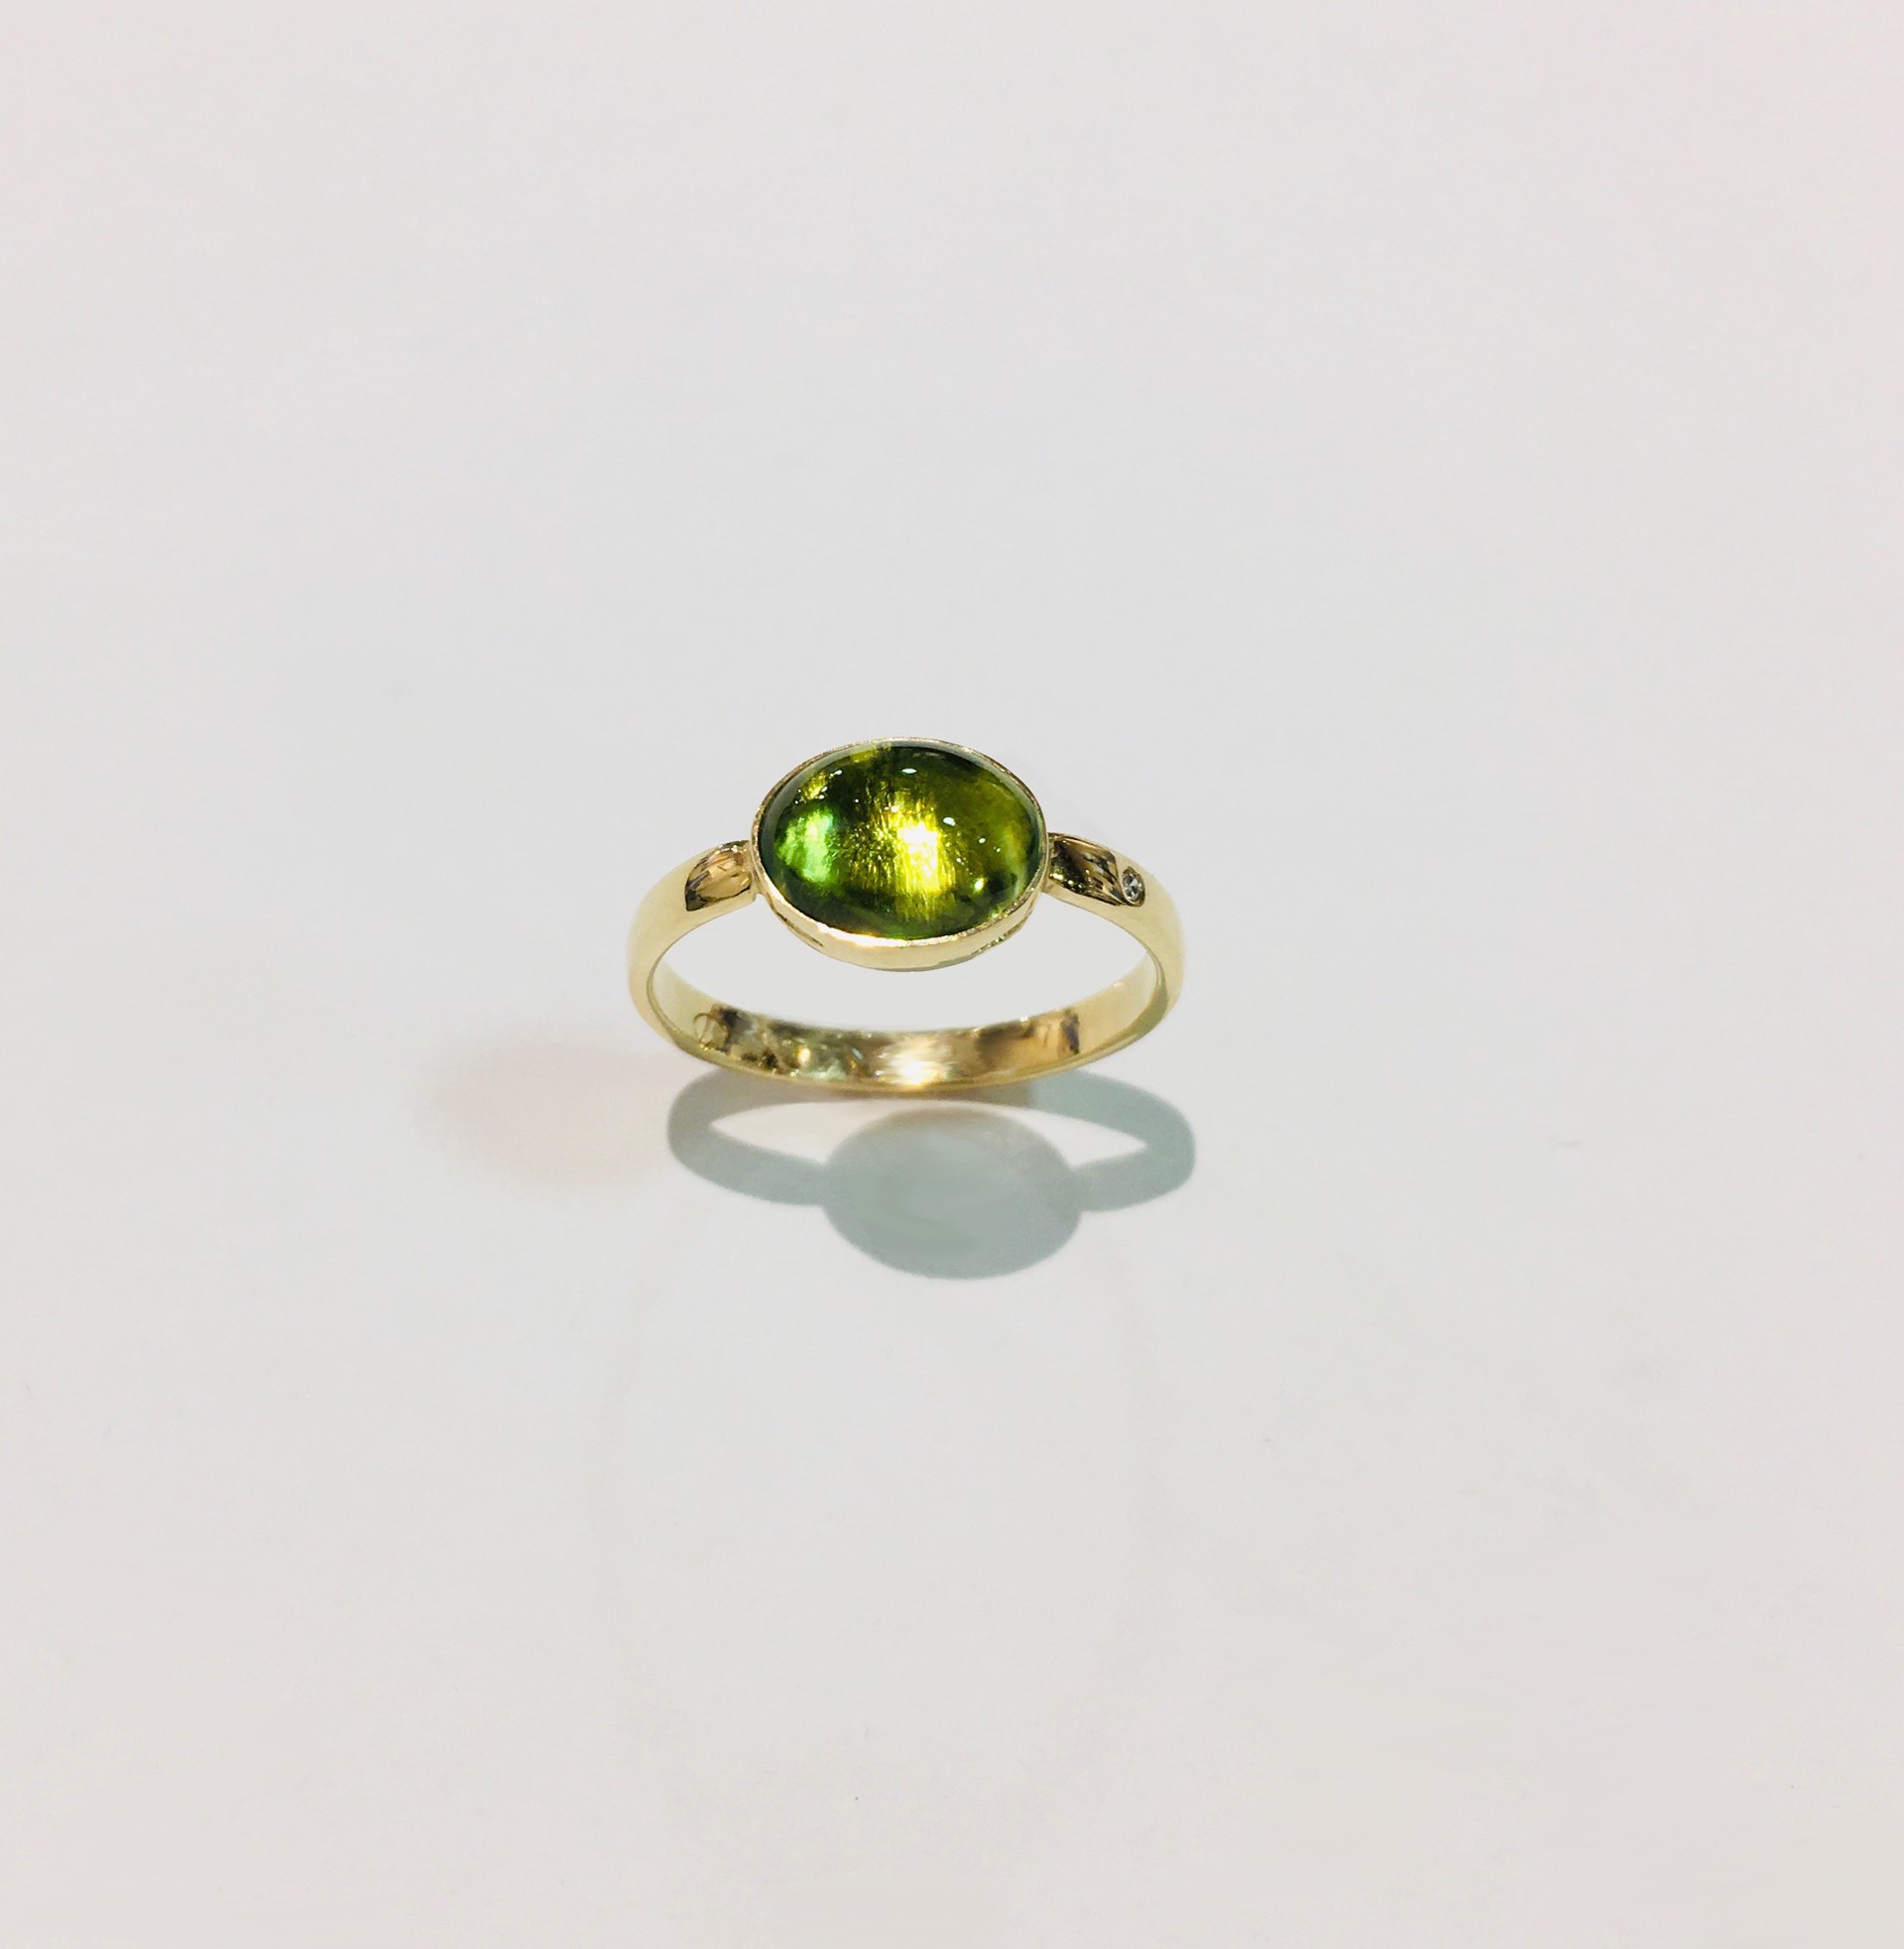 14K Gold, Peridot Ring with Small Diamond by D'ETTE DELFORGE